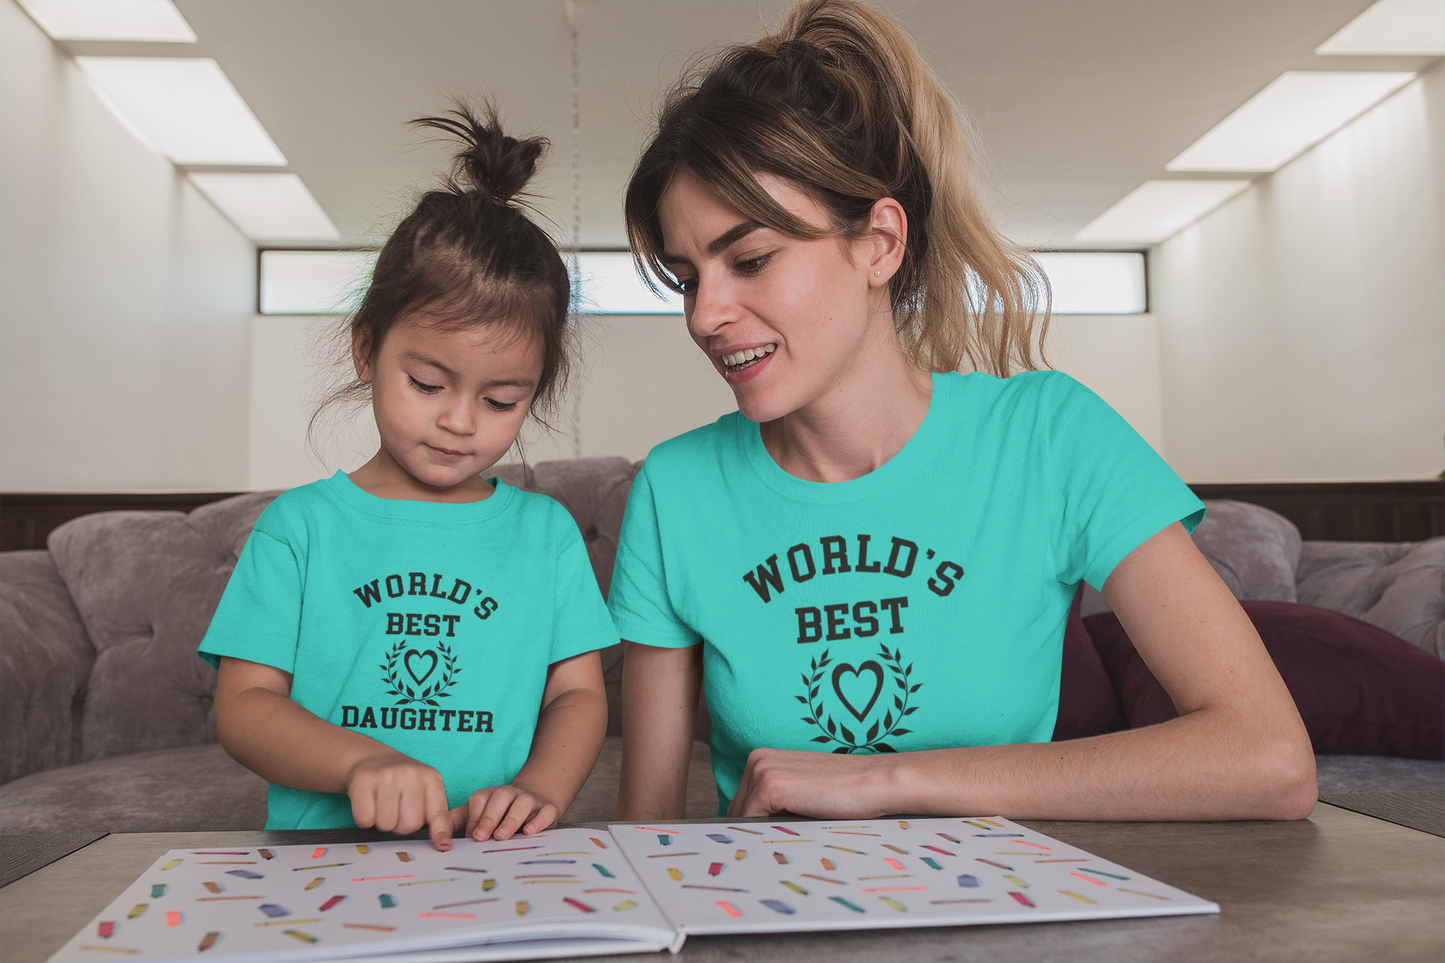 dresses for mom and daughter mother mommy same dress in india baby and mom world best mom and daughter girl women teaching learning cute family happy smilling women aqua blue